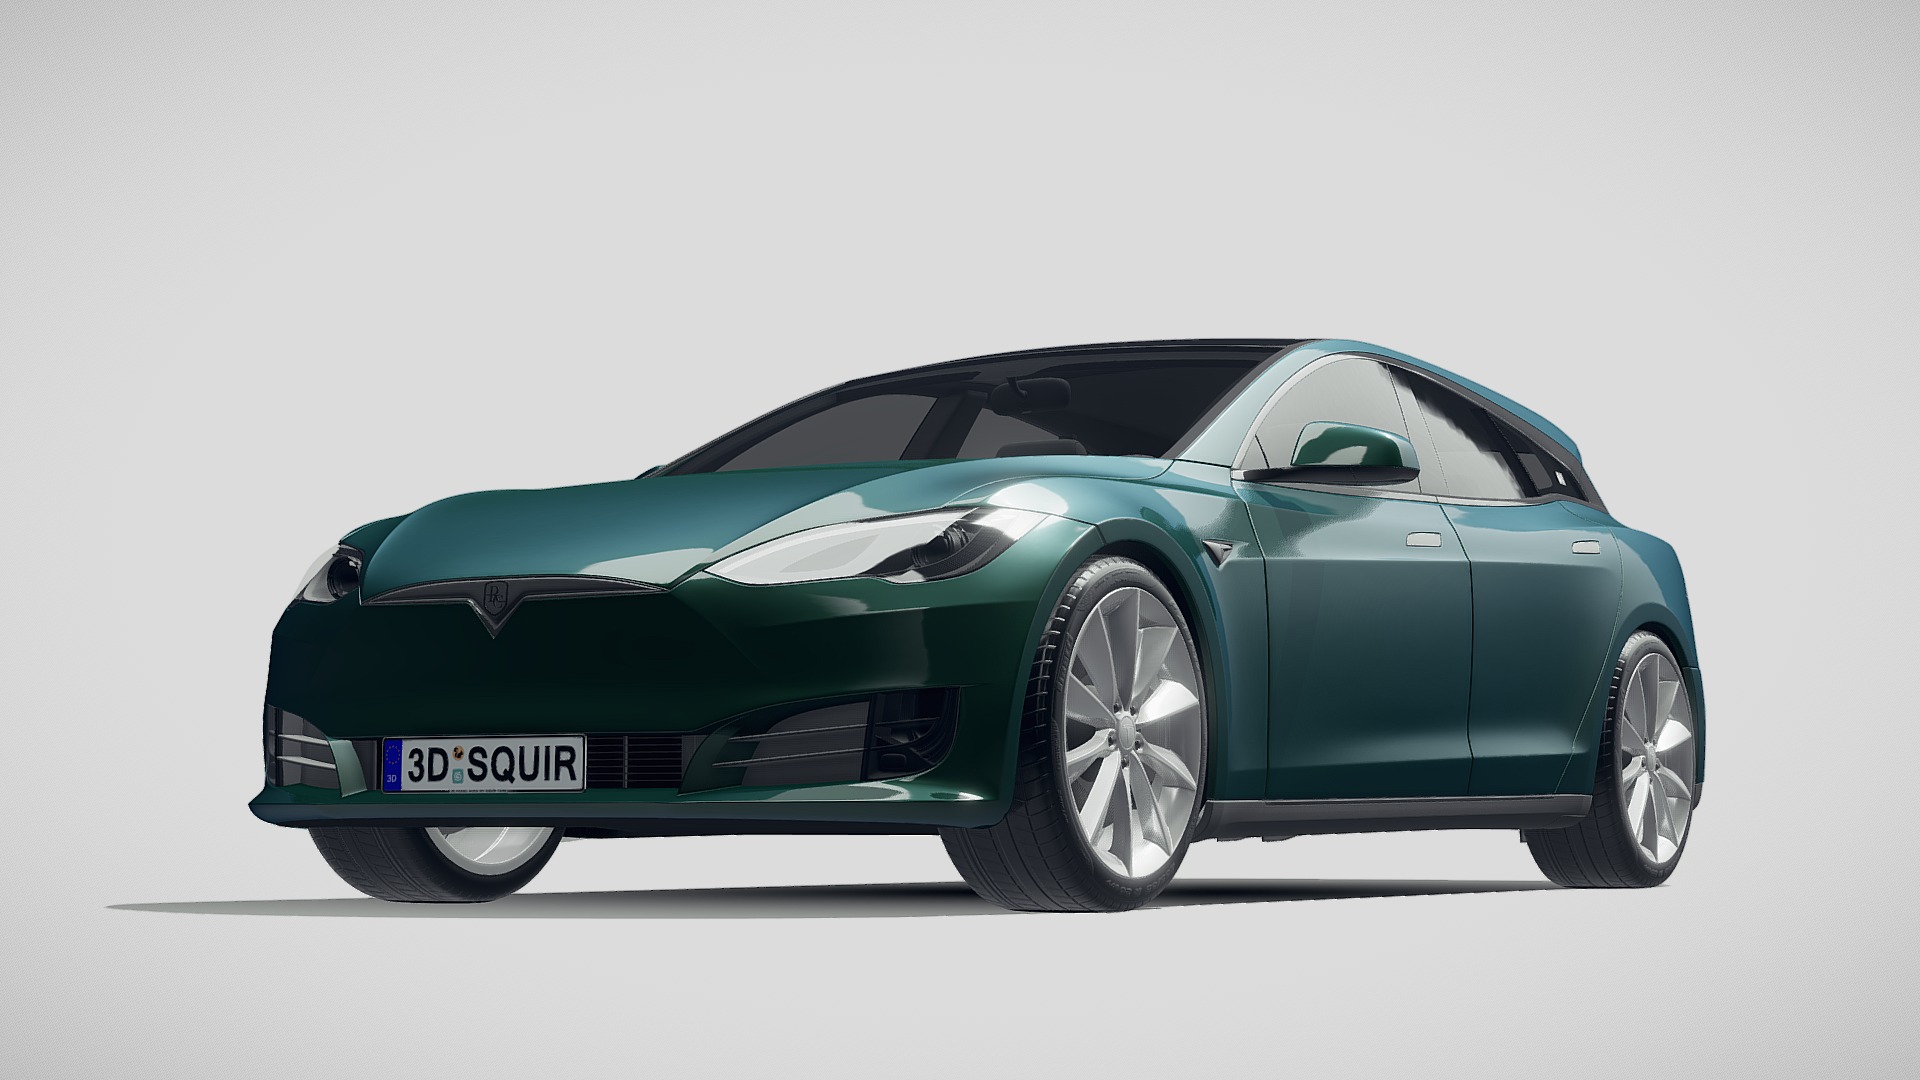 3D model Tesla Model S Shooting Brake 2019 - This is a 3D model of the Tesla Model S Shooting Brake 2019. The 3D model is about a green car with a white background.